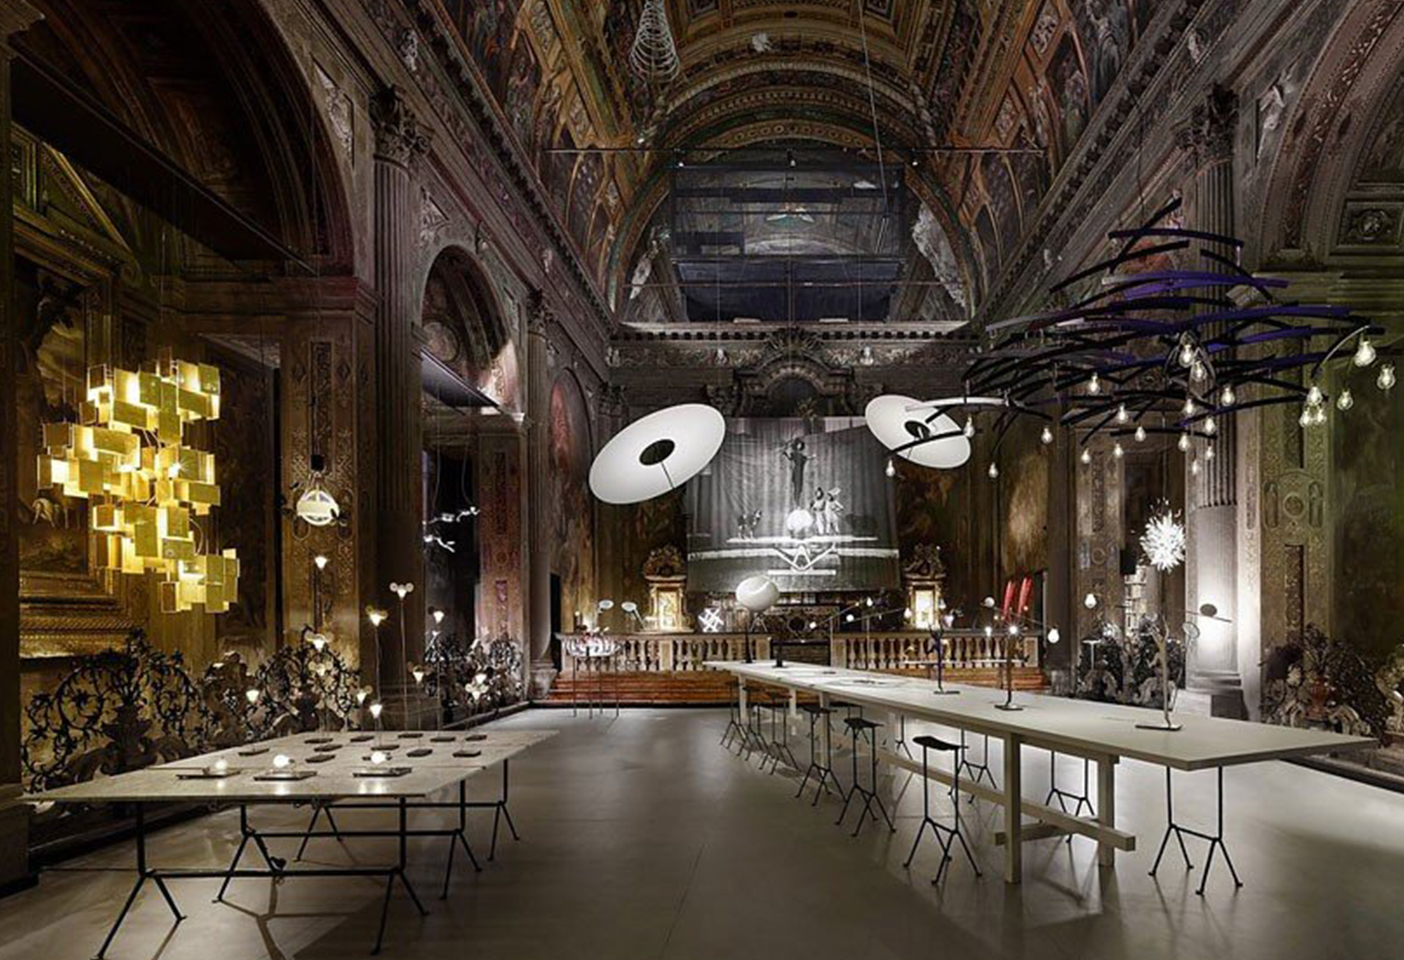 The lighting of Ingo Maurer on show inside the former San Paolo Converso Church in Milan. Photo c/o Ingo Maurer. 